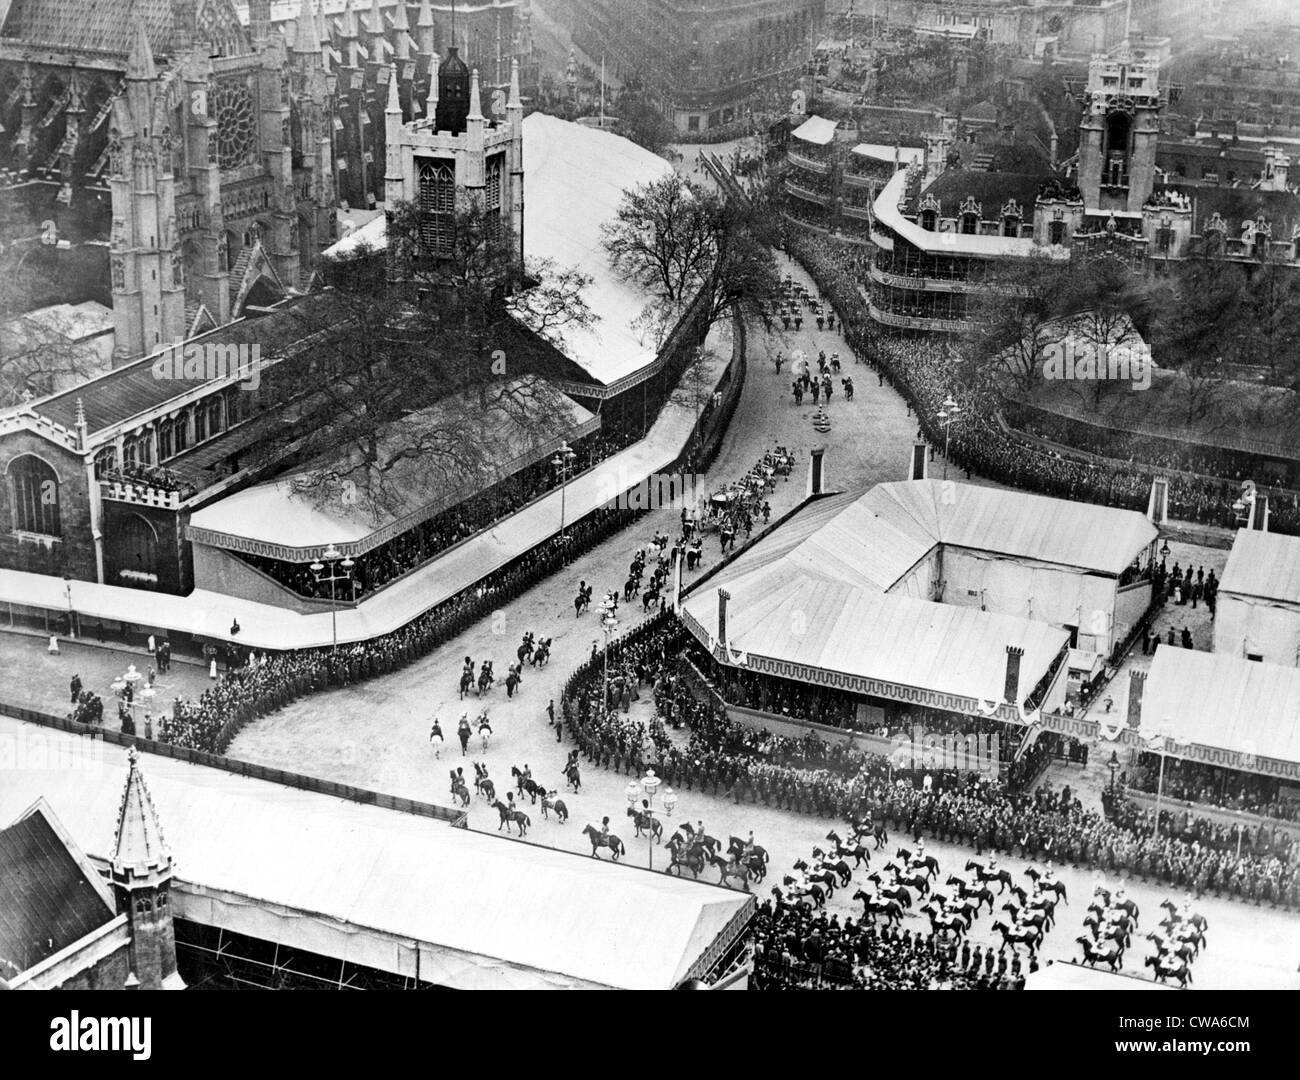 ARRIVING FOR CORONATION  A general view taken from the Big Ben Tower of the houses of parliament showing the royal coach Stock Photo